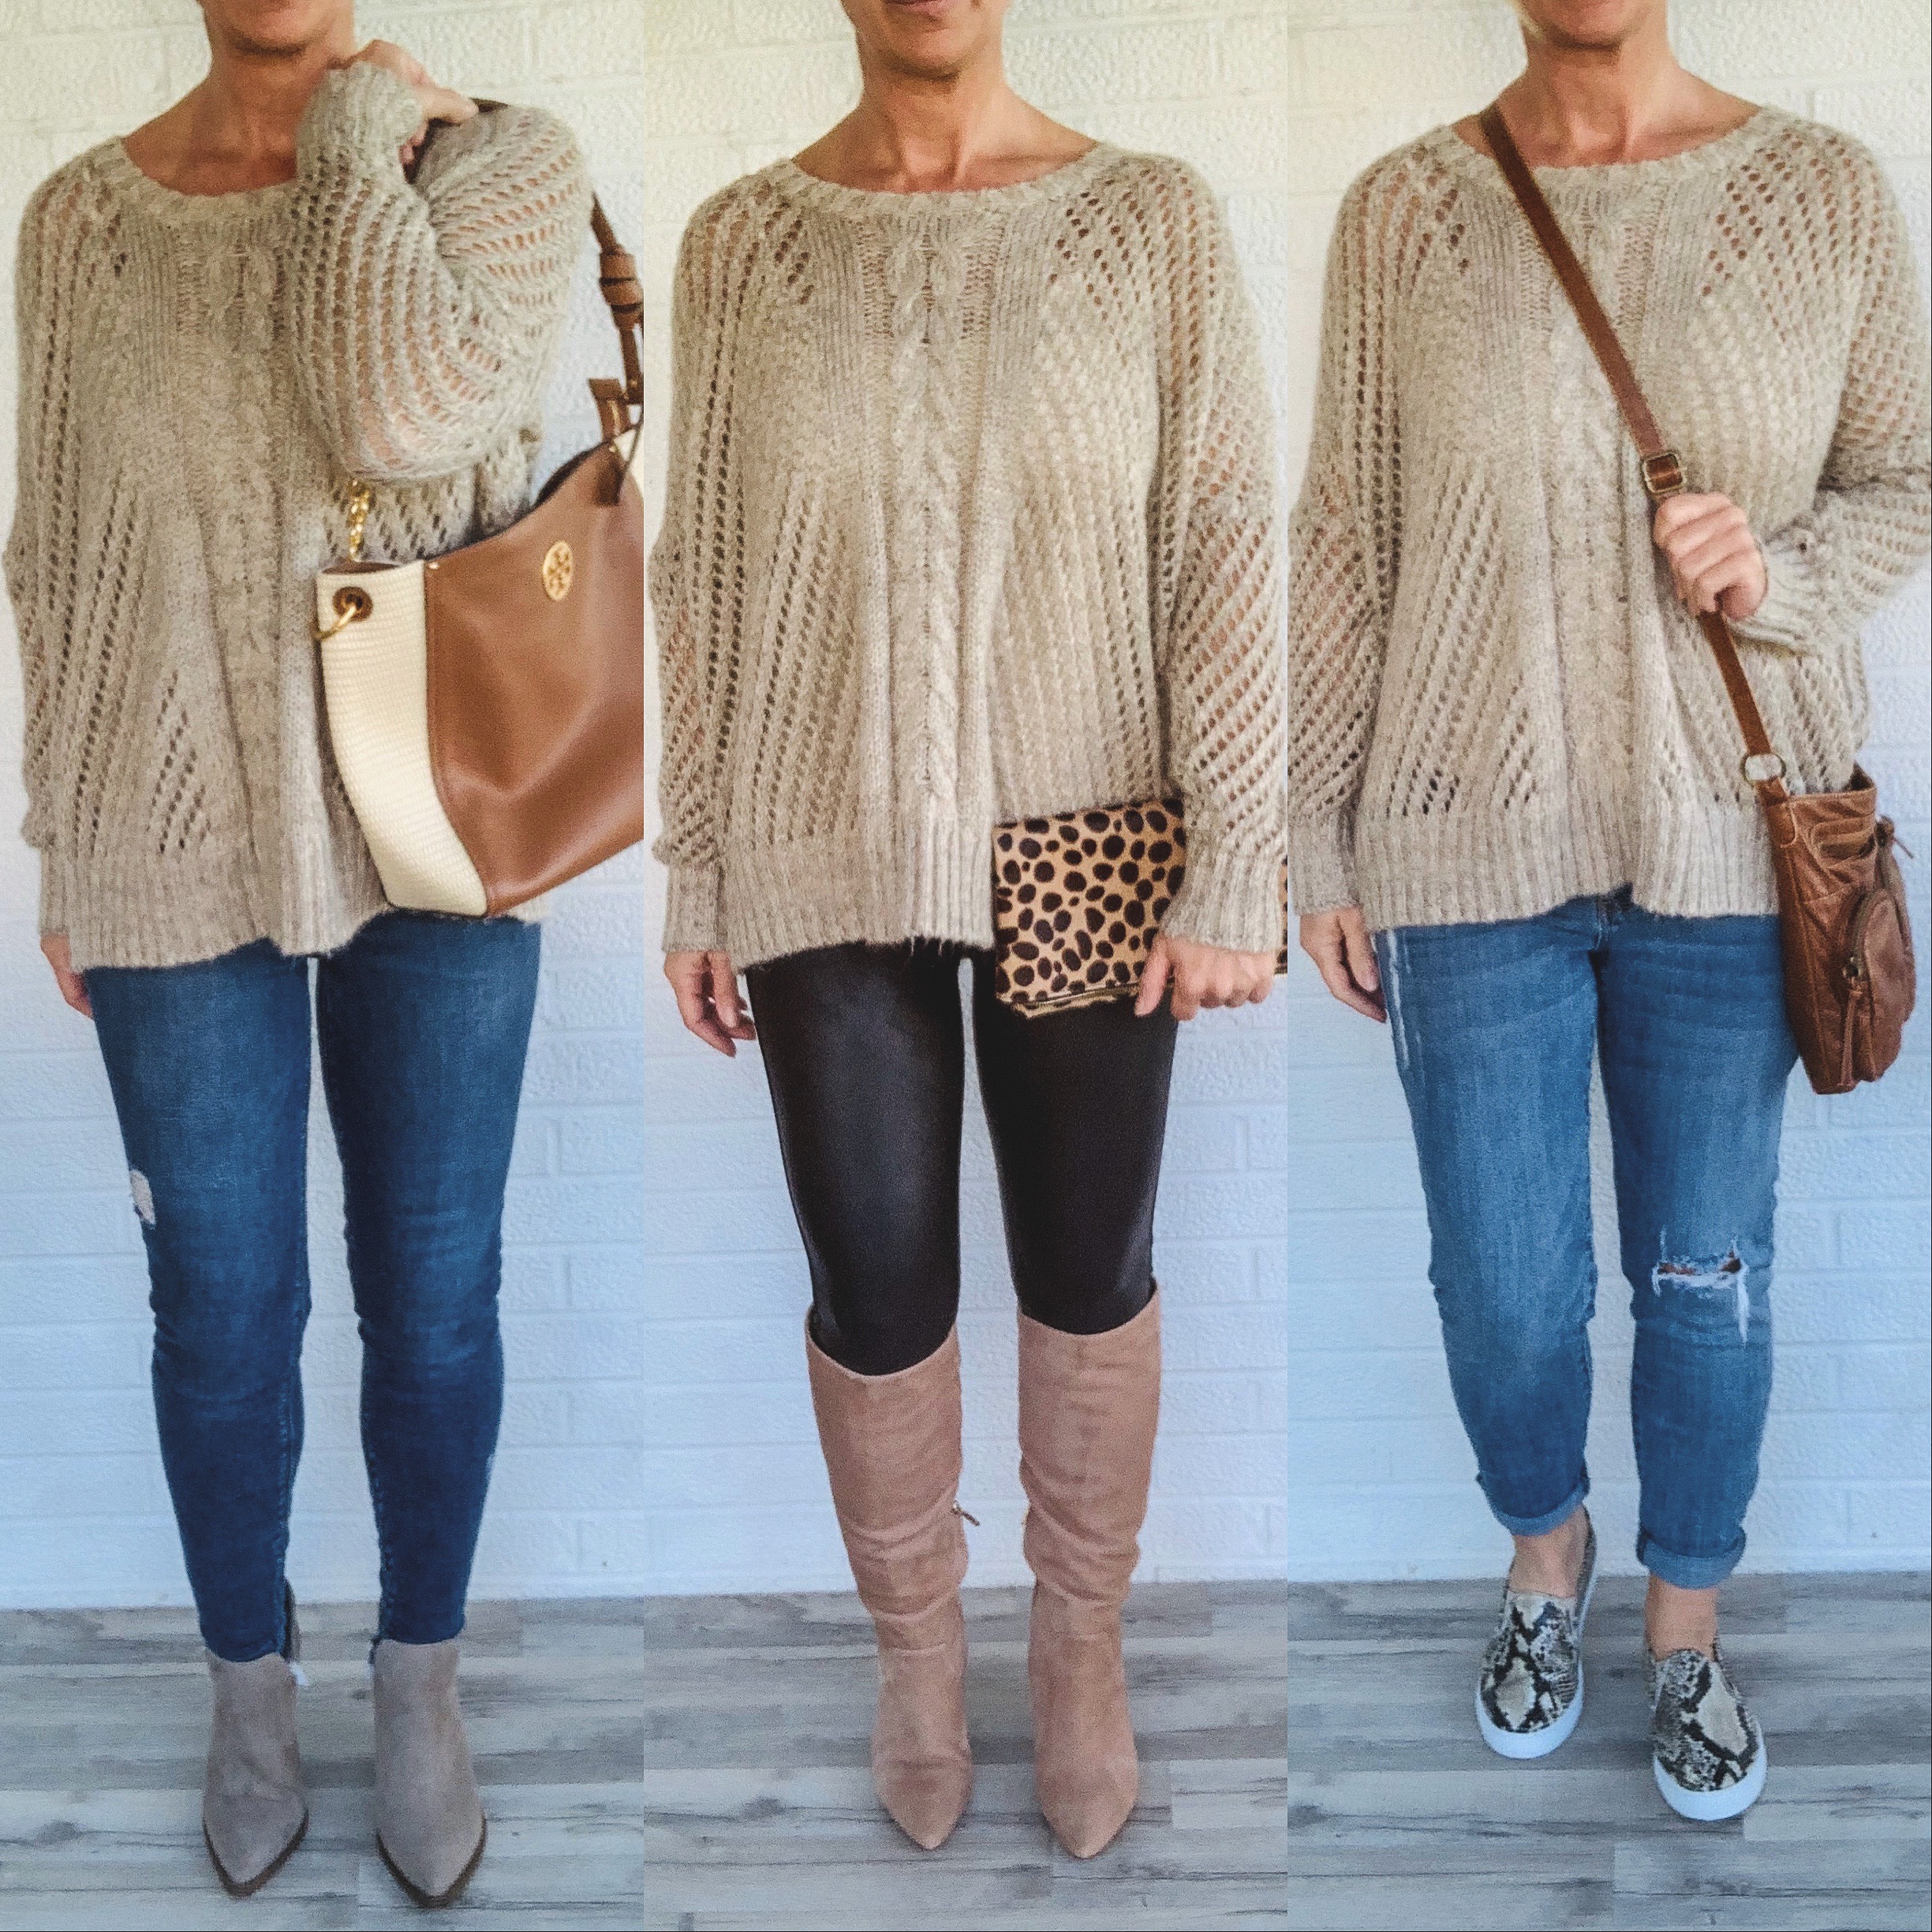 One Thrifted Sweater, Styled Three Ways